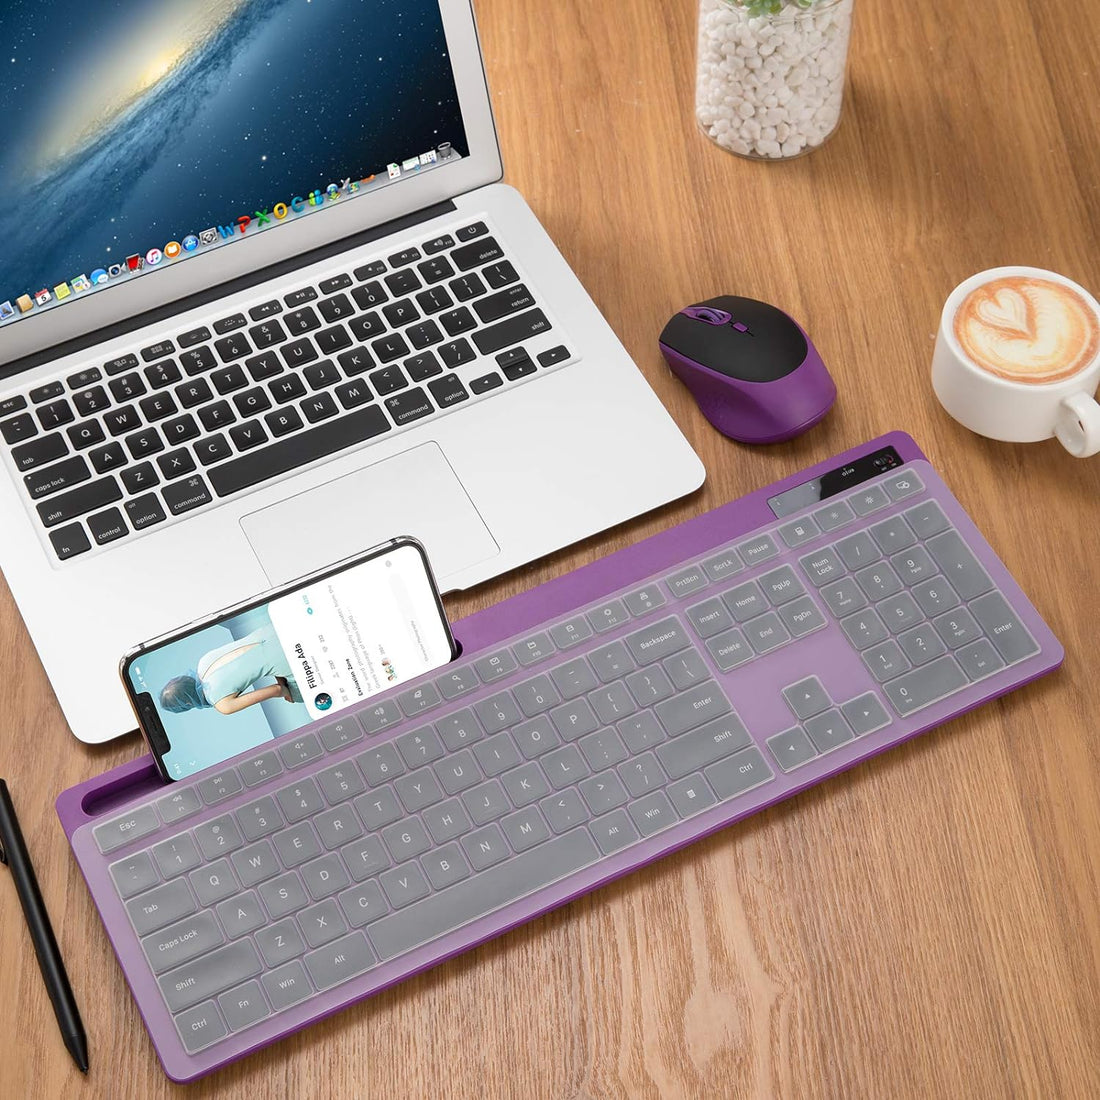 Wireless Keyboard and Mouse Combo - Keyboard with Phone Holder, seenda 2.4GHz Silent USB Wireless Keyboard Mouse Combo, Full-Size Keyboard and Mouse for Computer, Desktop and Laptop (Purple)